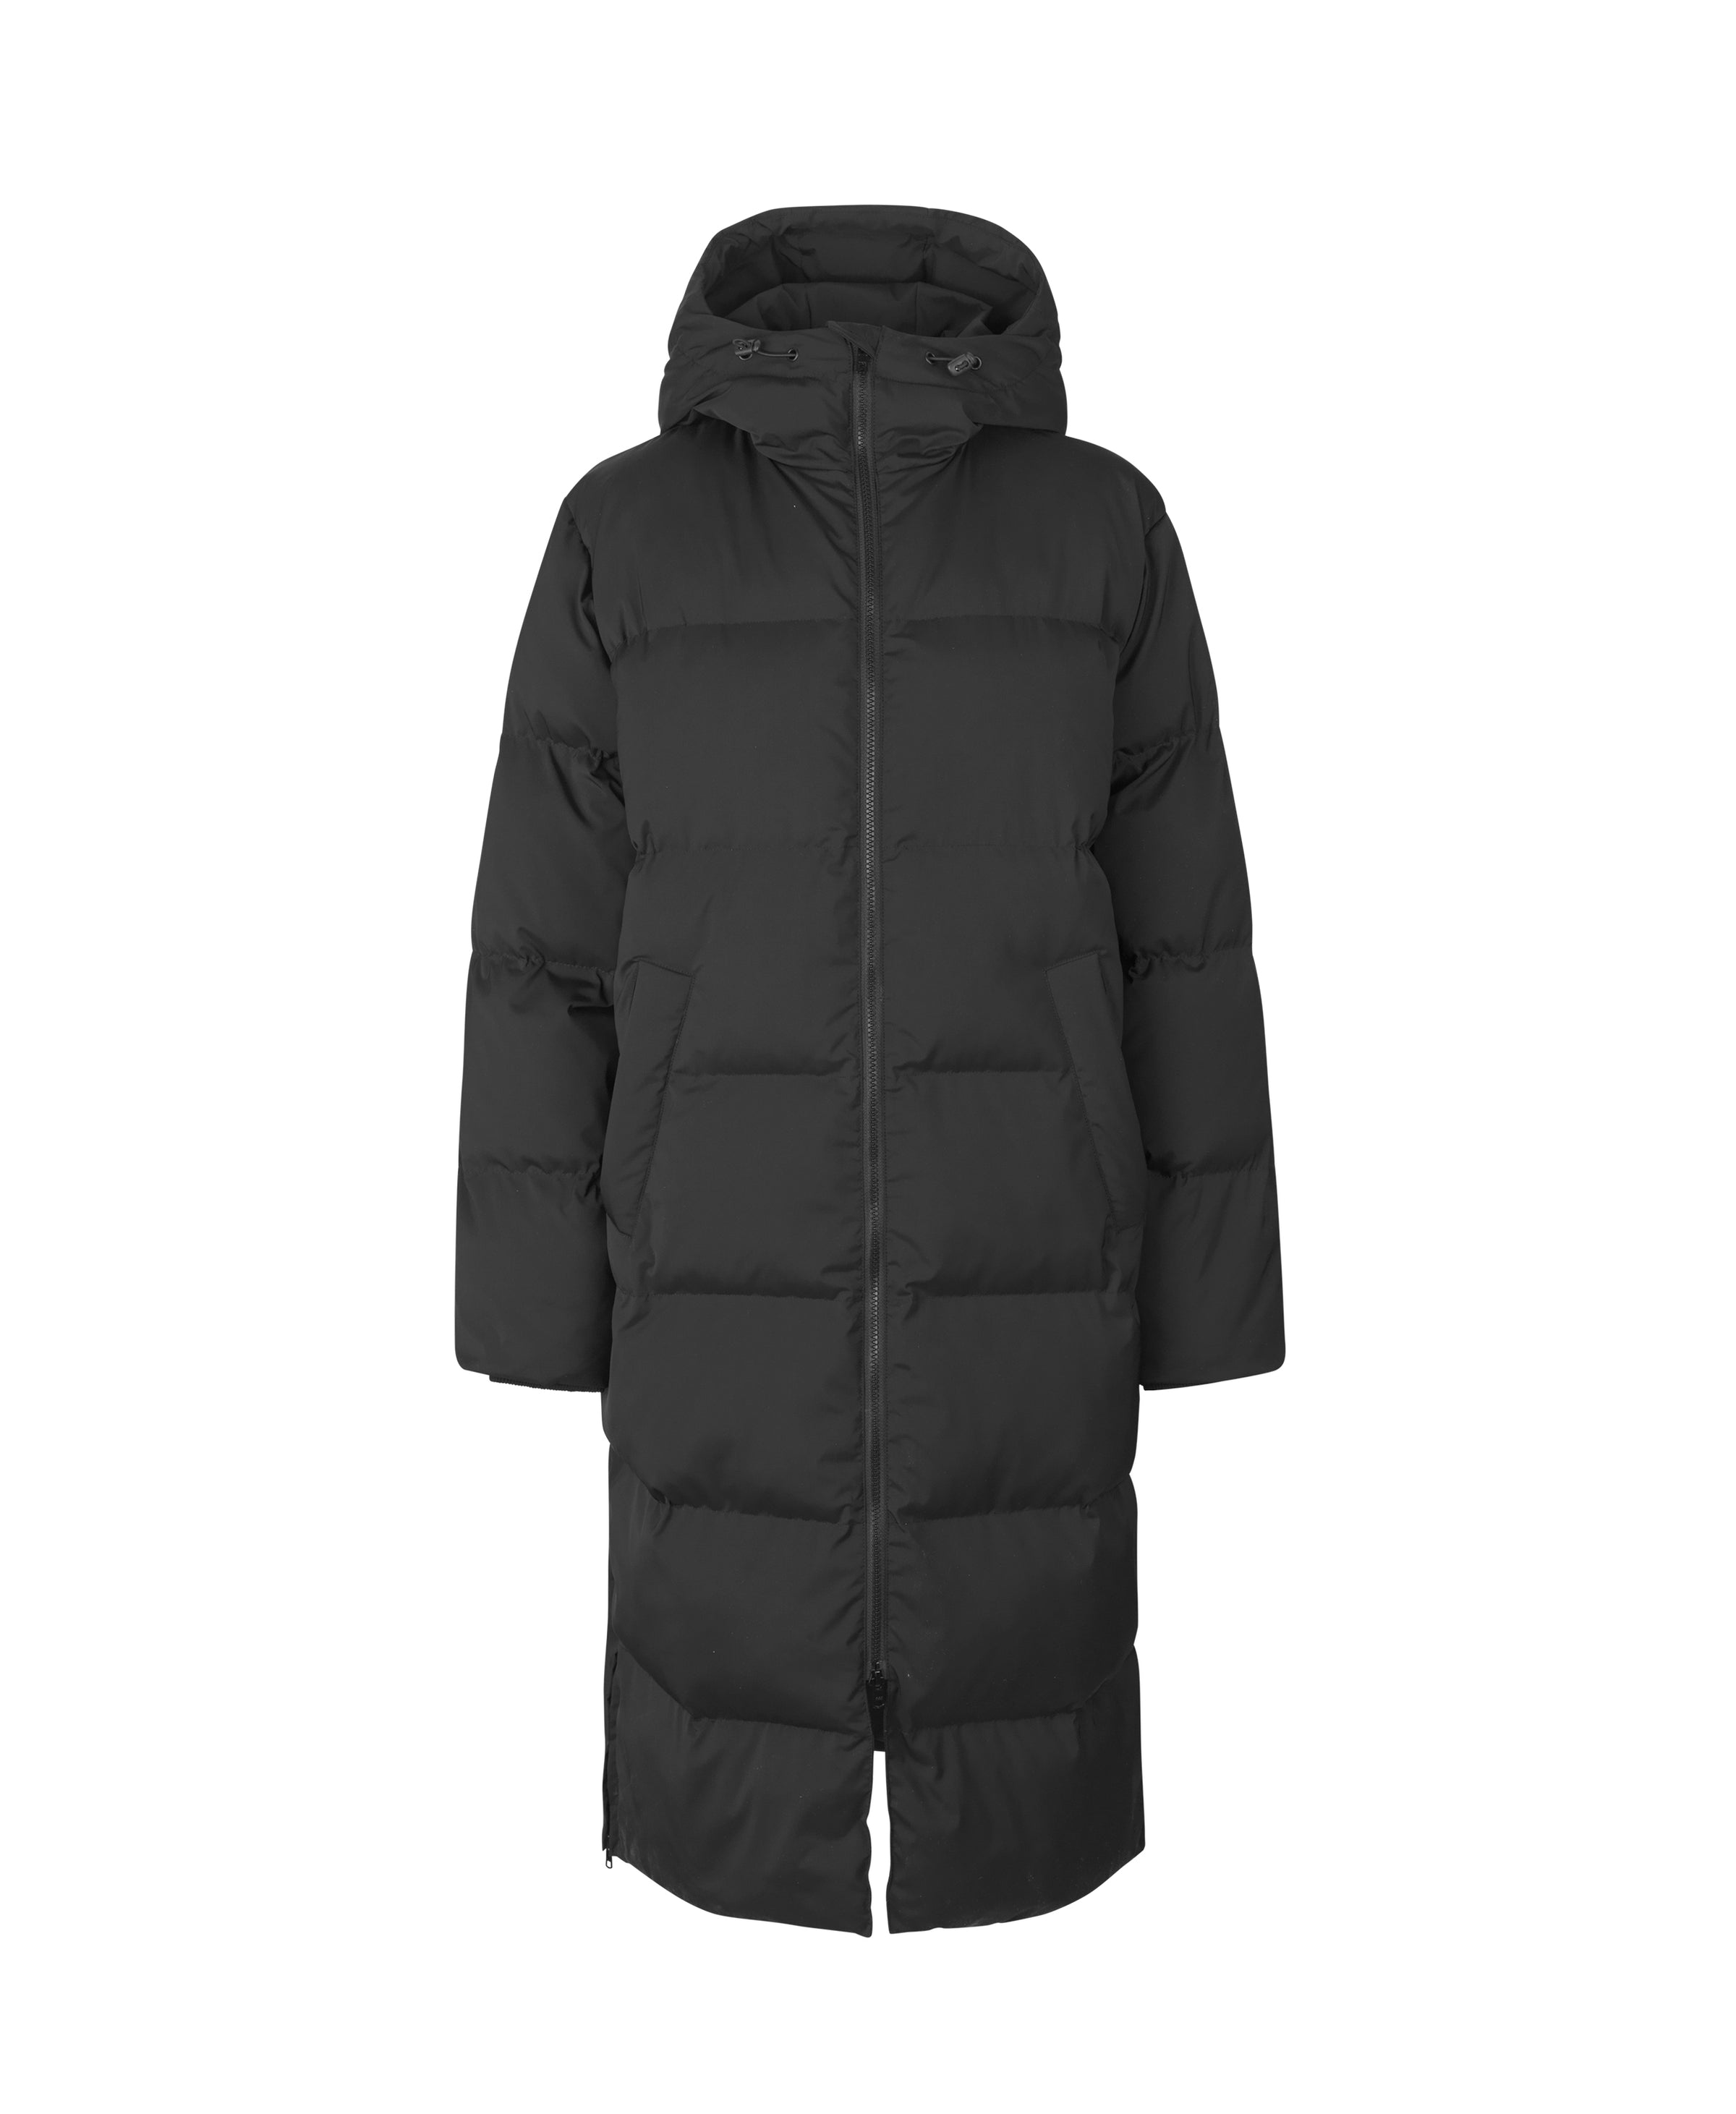 Long quilted and padded winter coat with full length zip fastening and large padded hood